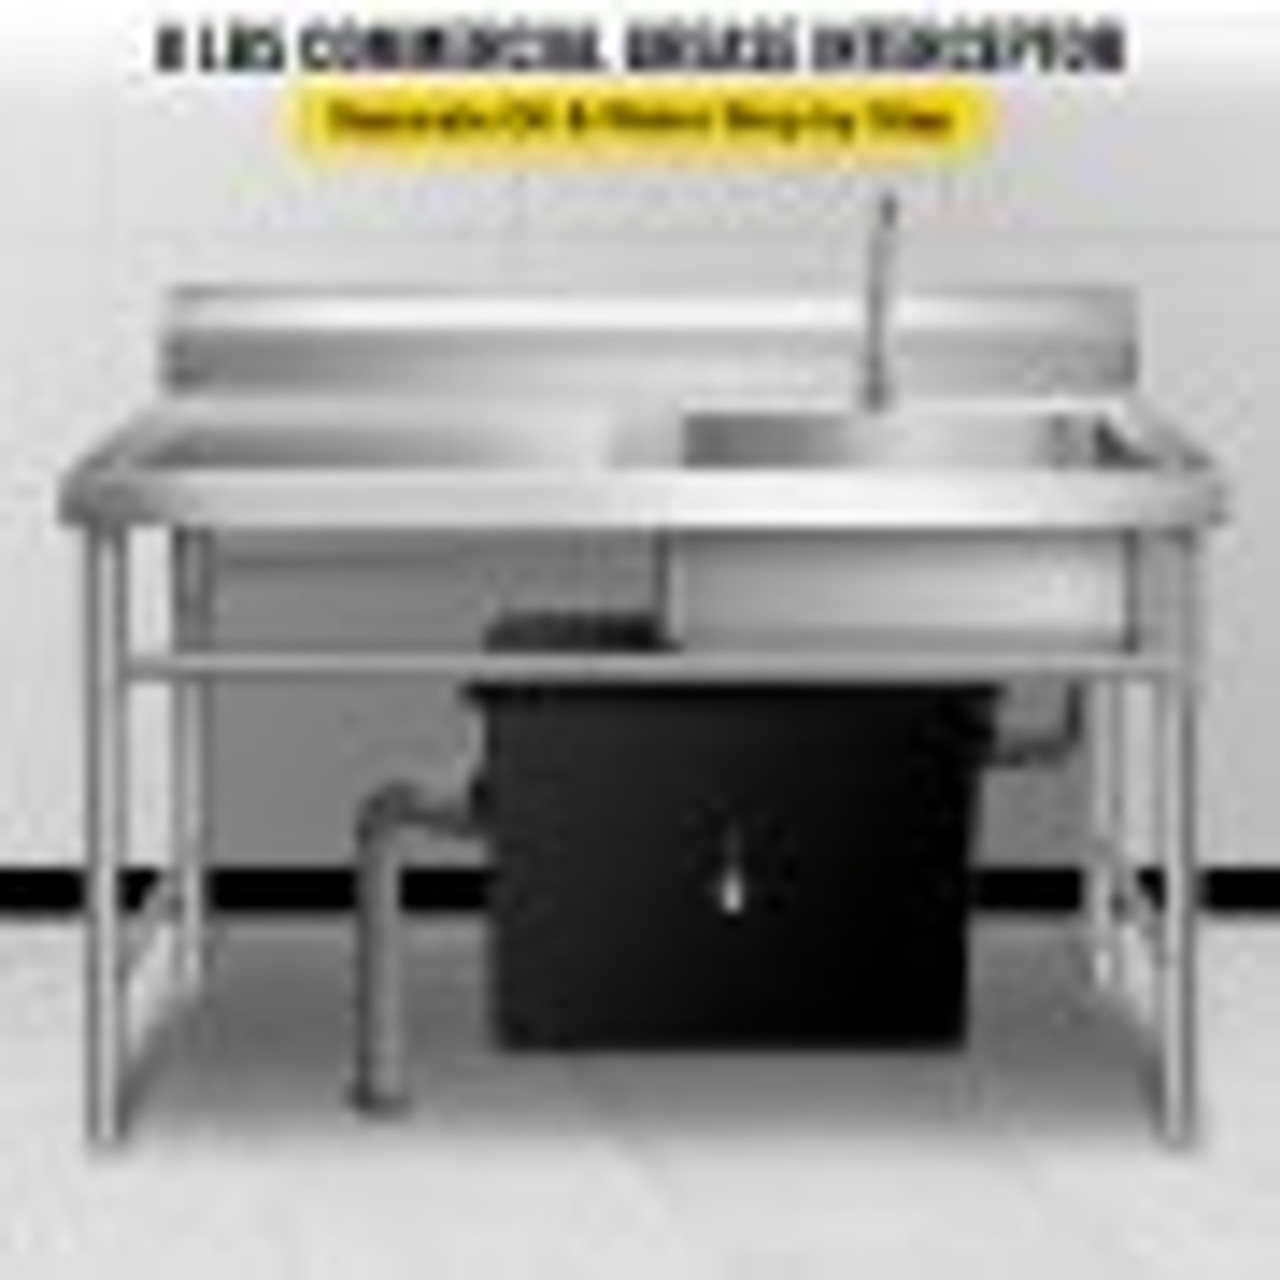 Commercial Grease Interceptor 8 LB, Carbon Steel Grease Trap 4 GPM, Grease Interceptor Trap with Side Water Inlet, Under Sink Grease Trap for Restaurant Canteen Factory Home Kitchen